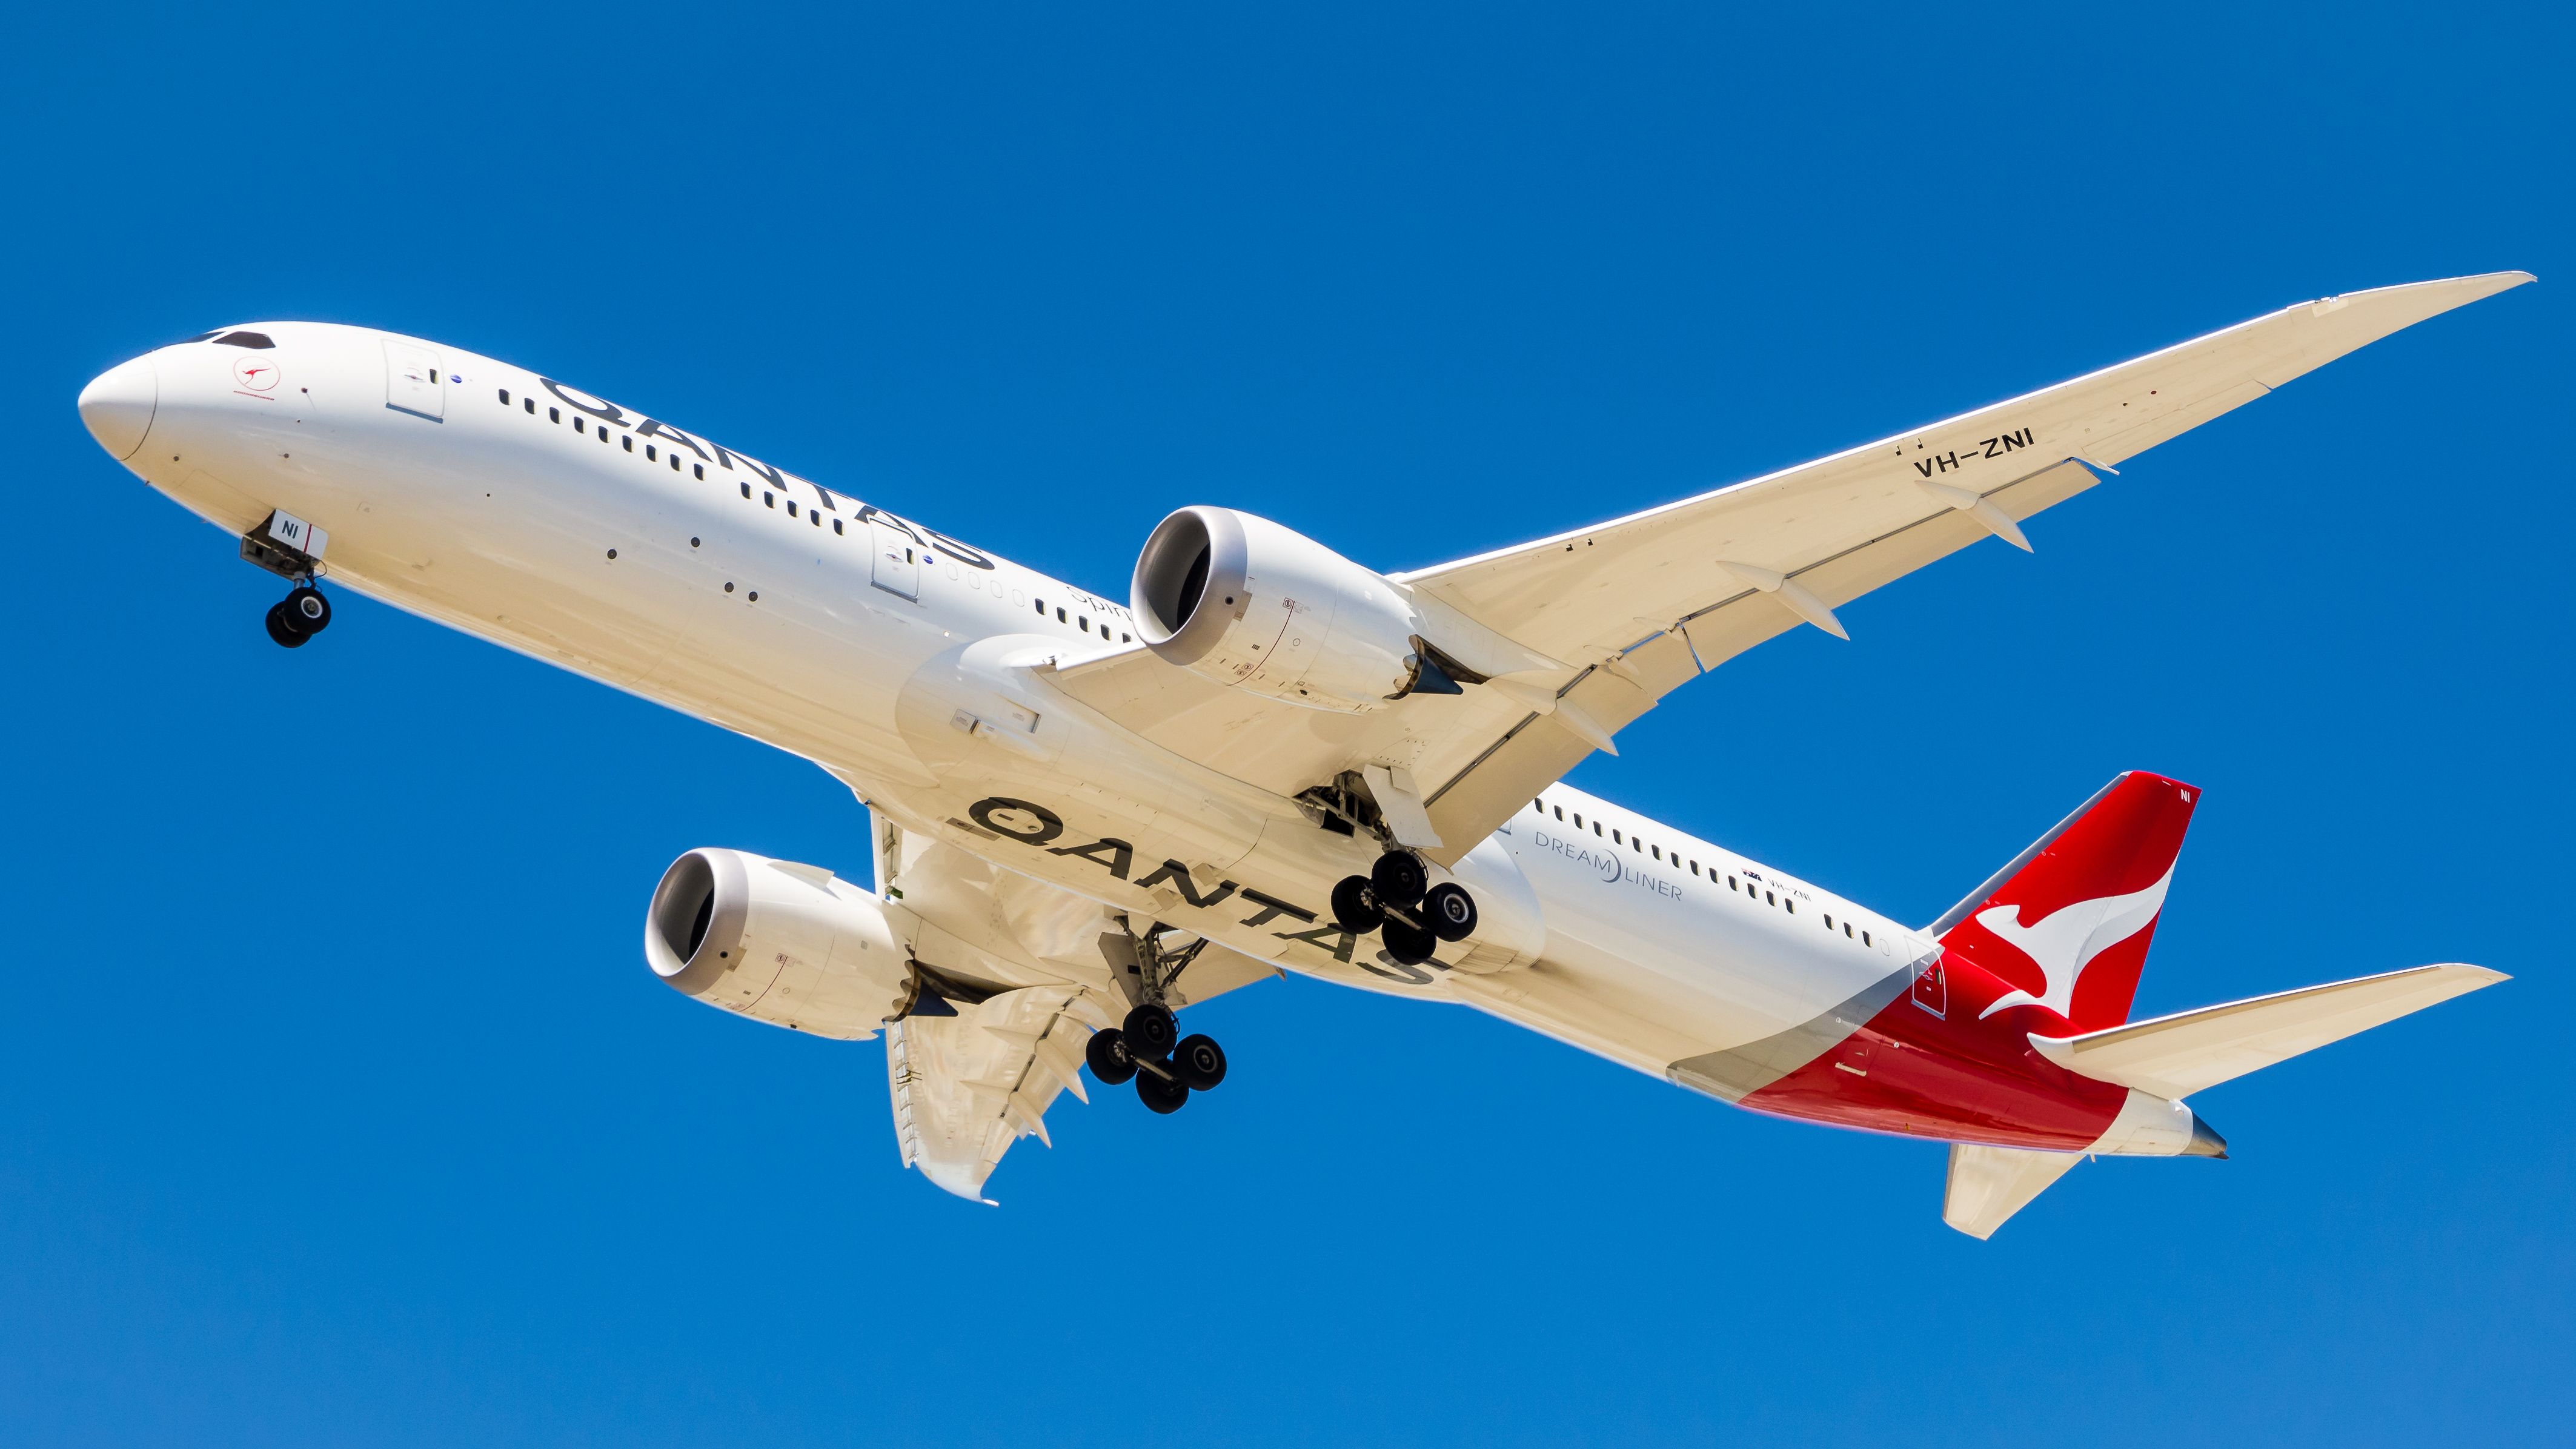 A Qantas Boeing 787 Dreamliner flying in the sky.